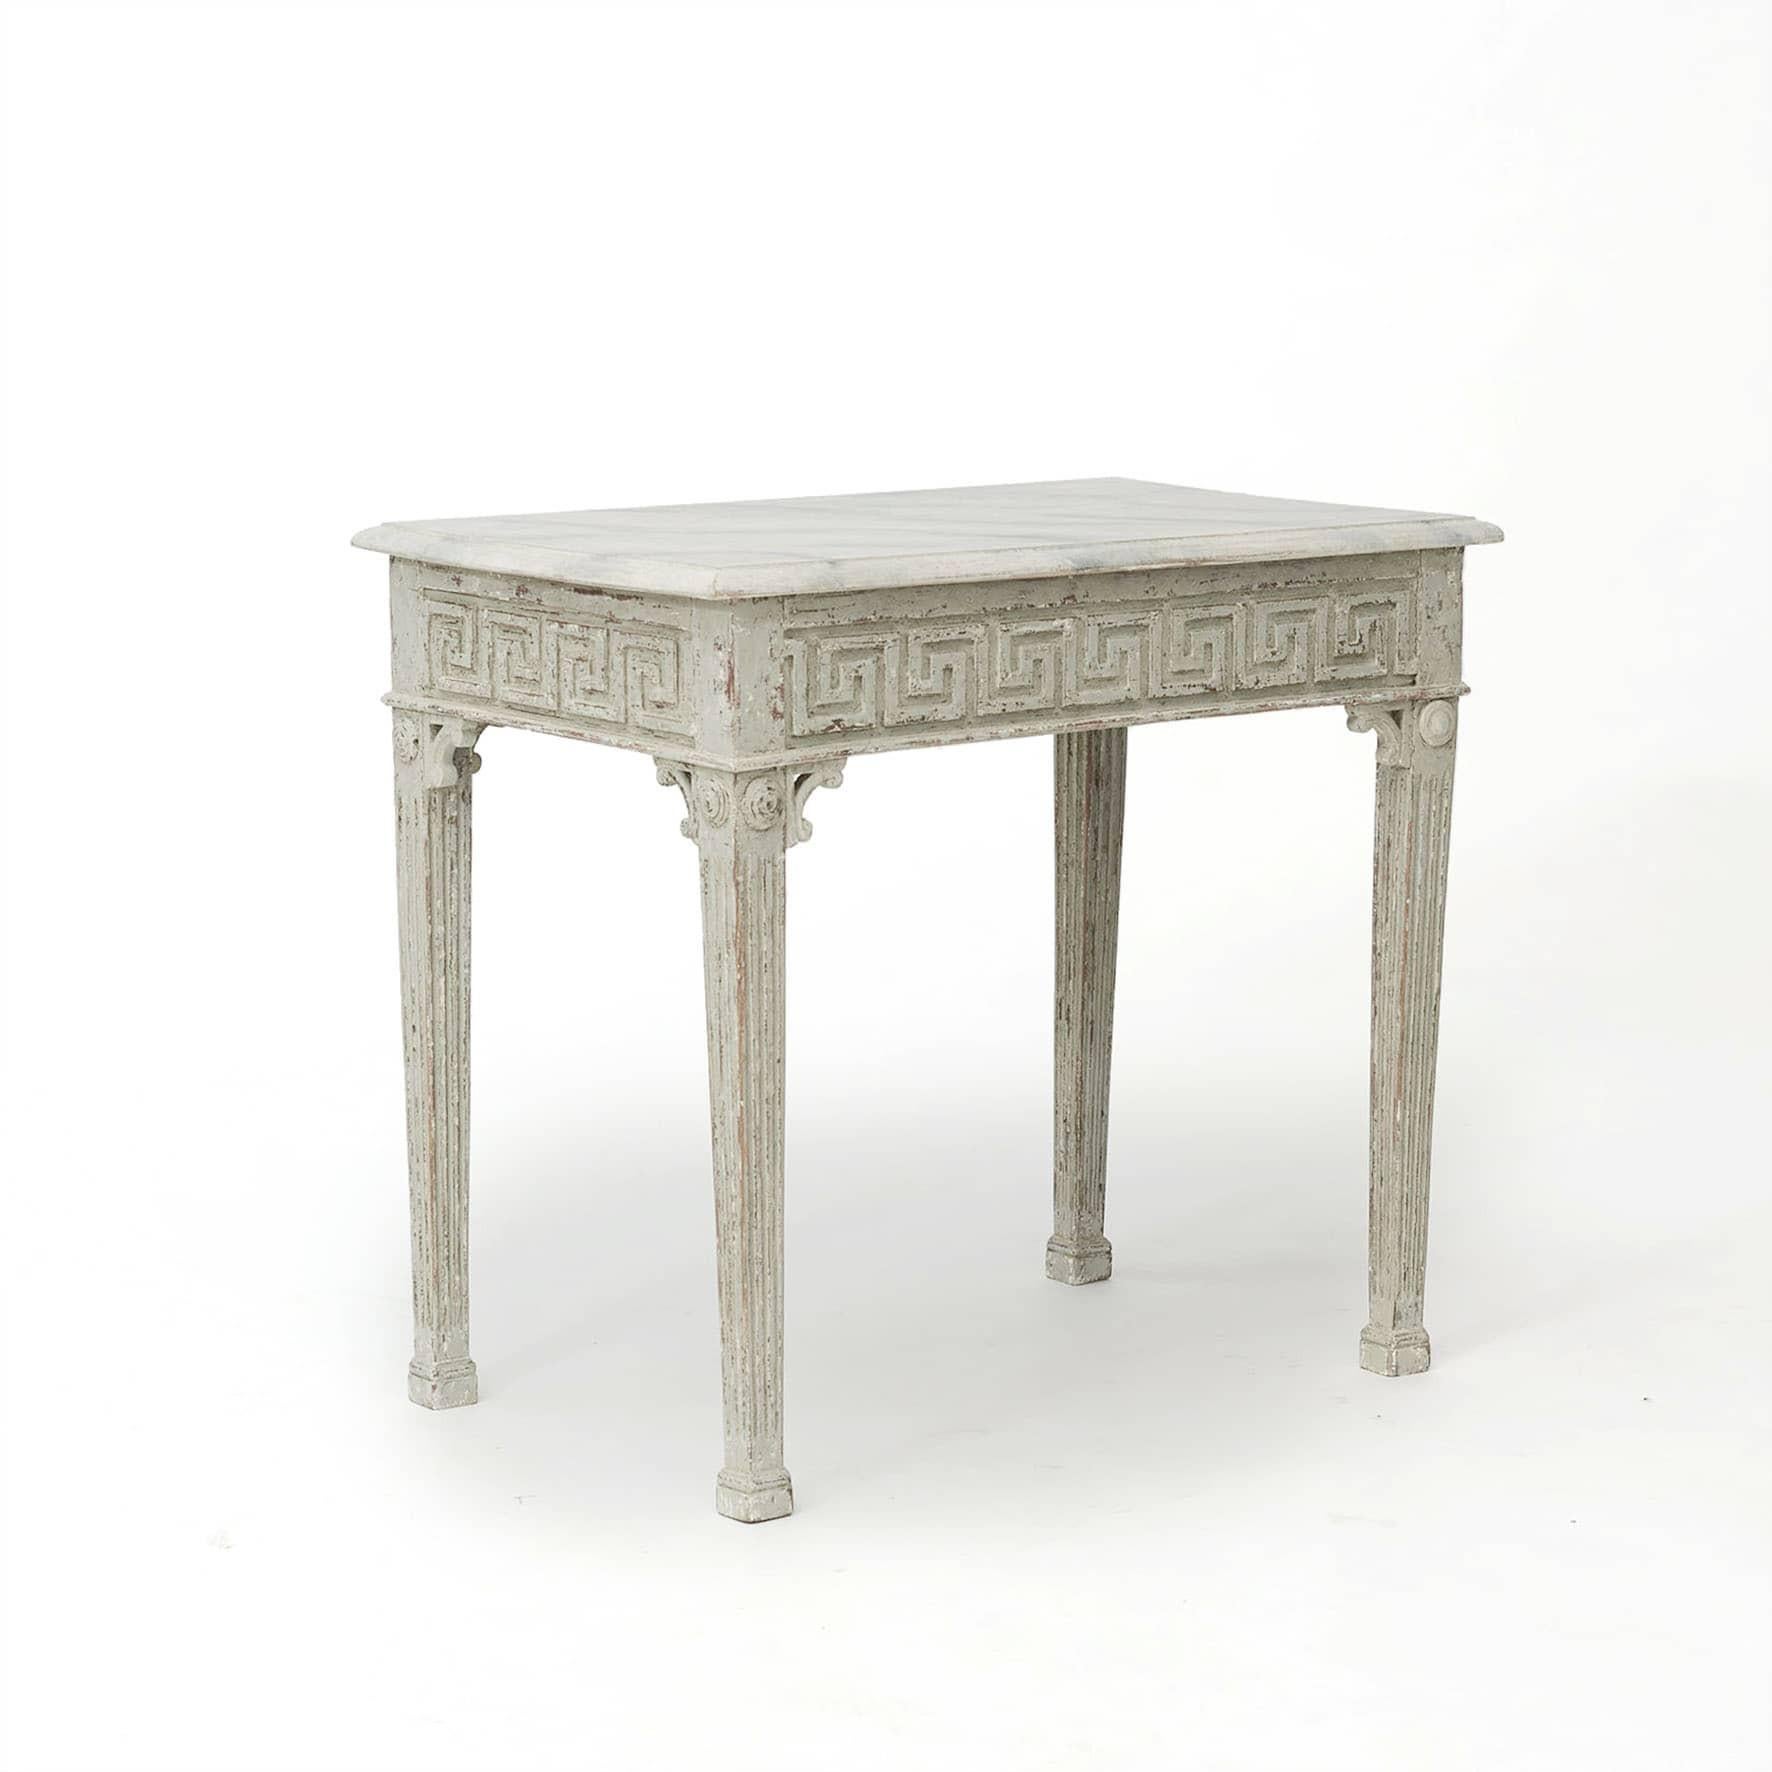 Elegant Louis XVI console table.
Light gray marbled table top with profiled edge.
Apron with carved 'á la grecque' on all four sides. Tapered legs with flutes finished.
Copenhagen, 1780-1790.
Professional restored.